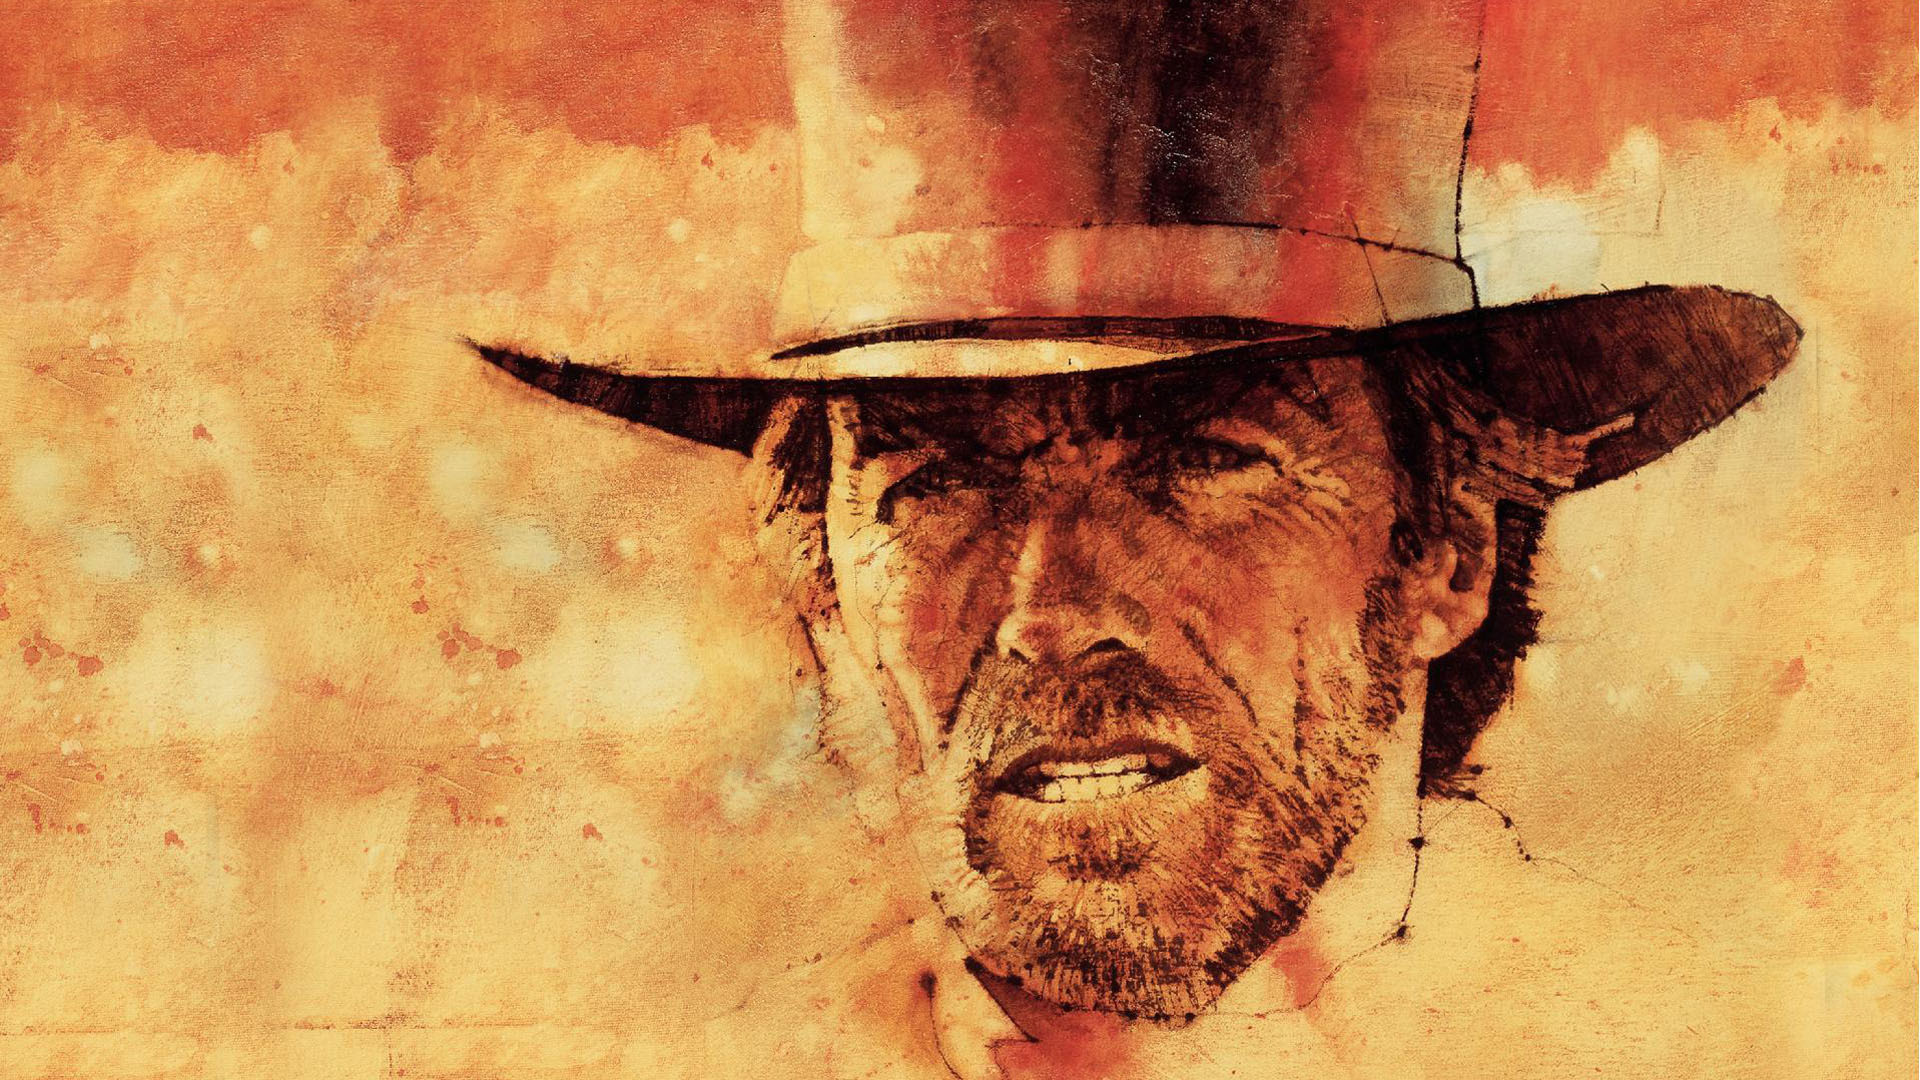 A scene from the movie Pale Rider, depicted in a high-definition desktop wallpaper and background.